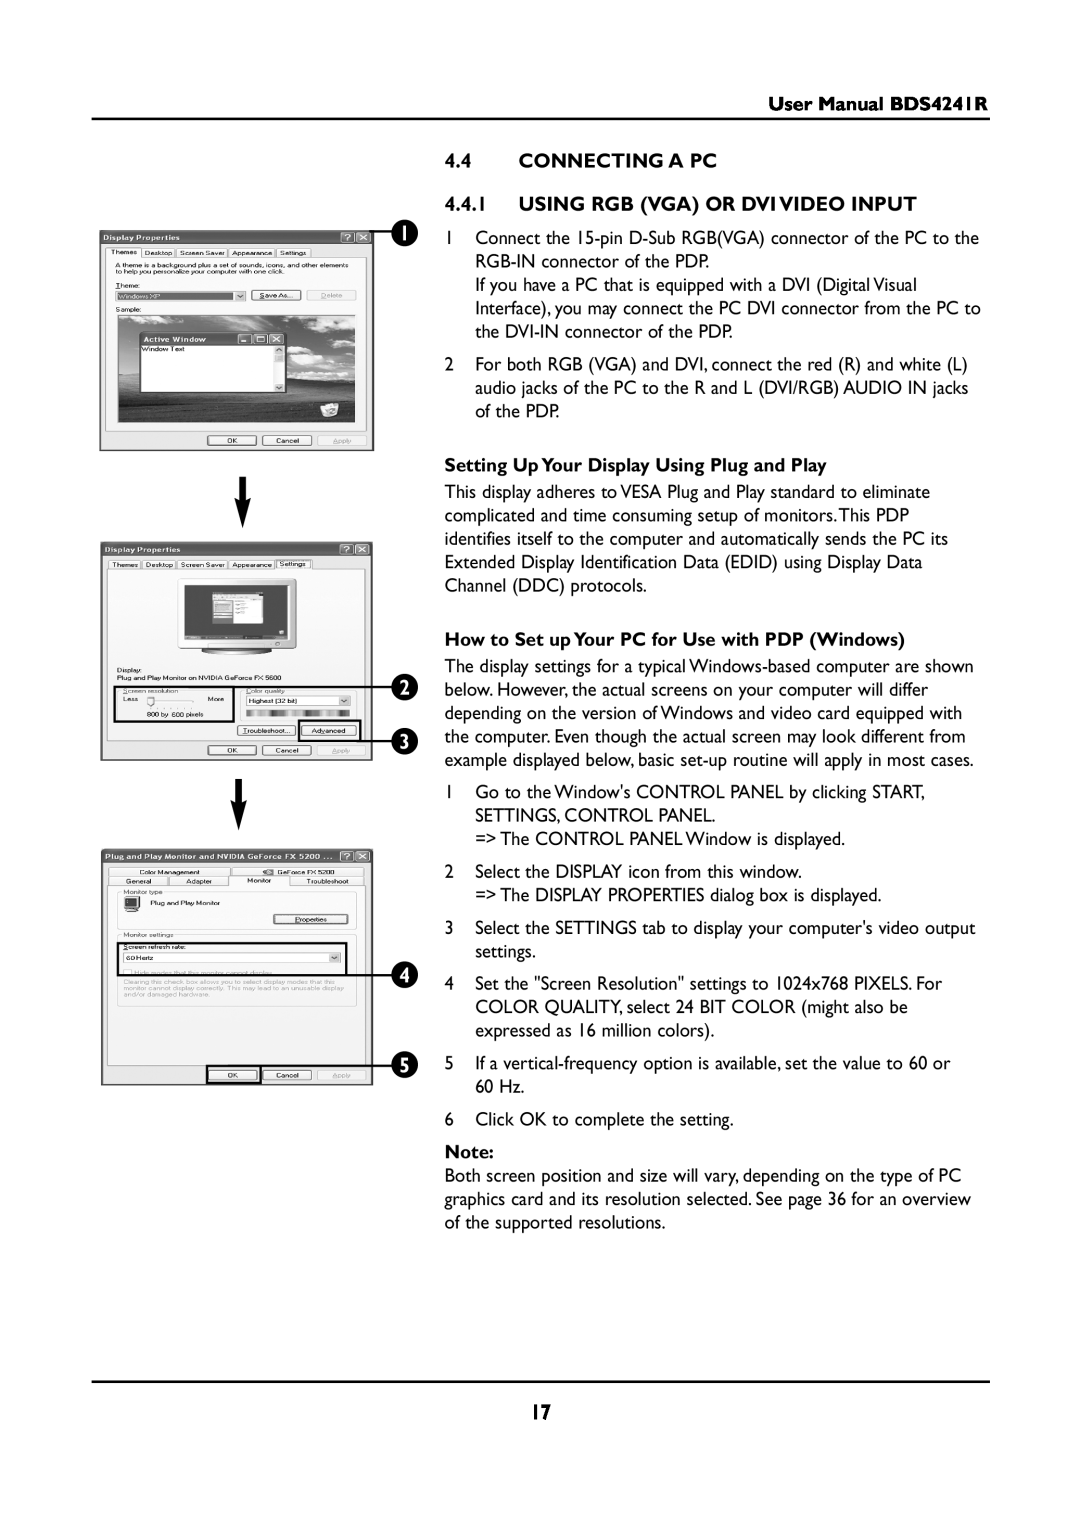 Philips BDS4241R manual CONNECTING A PC 4.4.1 USING RGB VGA OR DVI VIDEO INPUT, Setting Up Your Display Using Plug and Play 